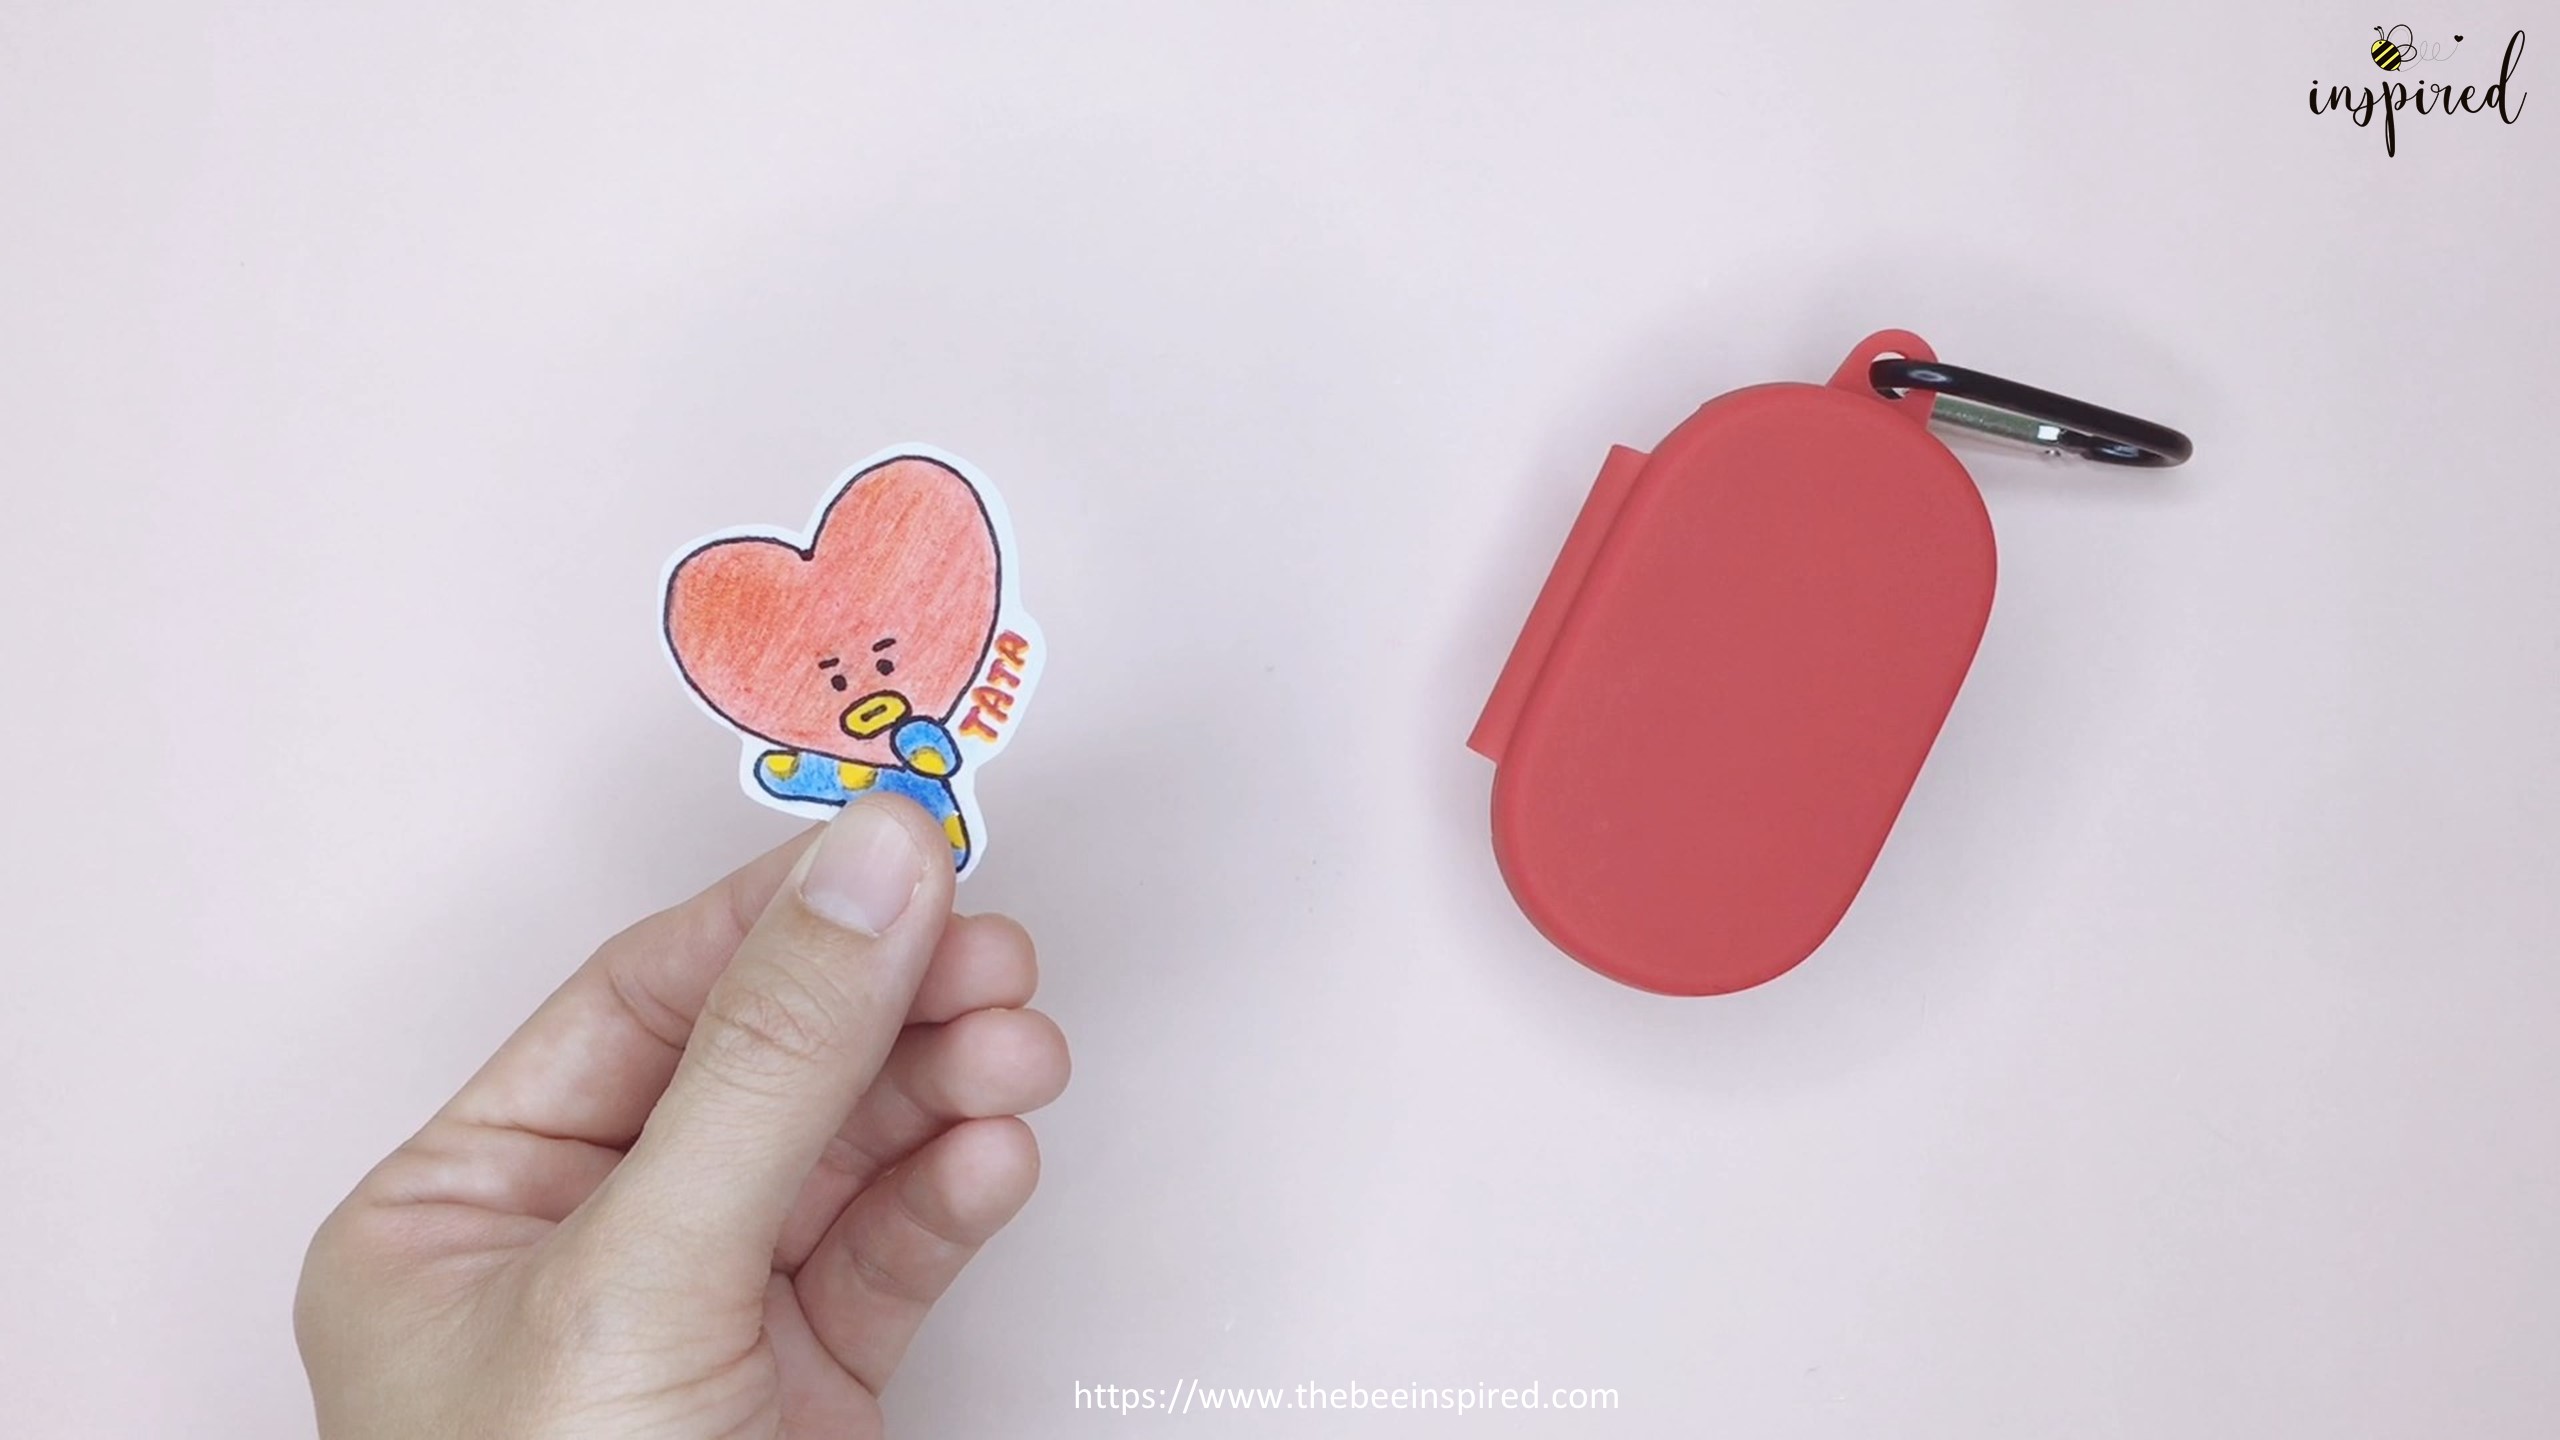 How to Make BTS Sticker from My Drawing without Sticker Paper_15